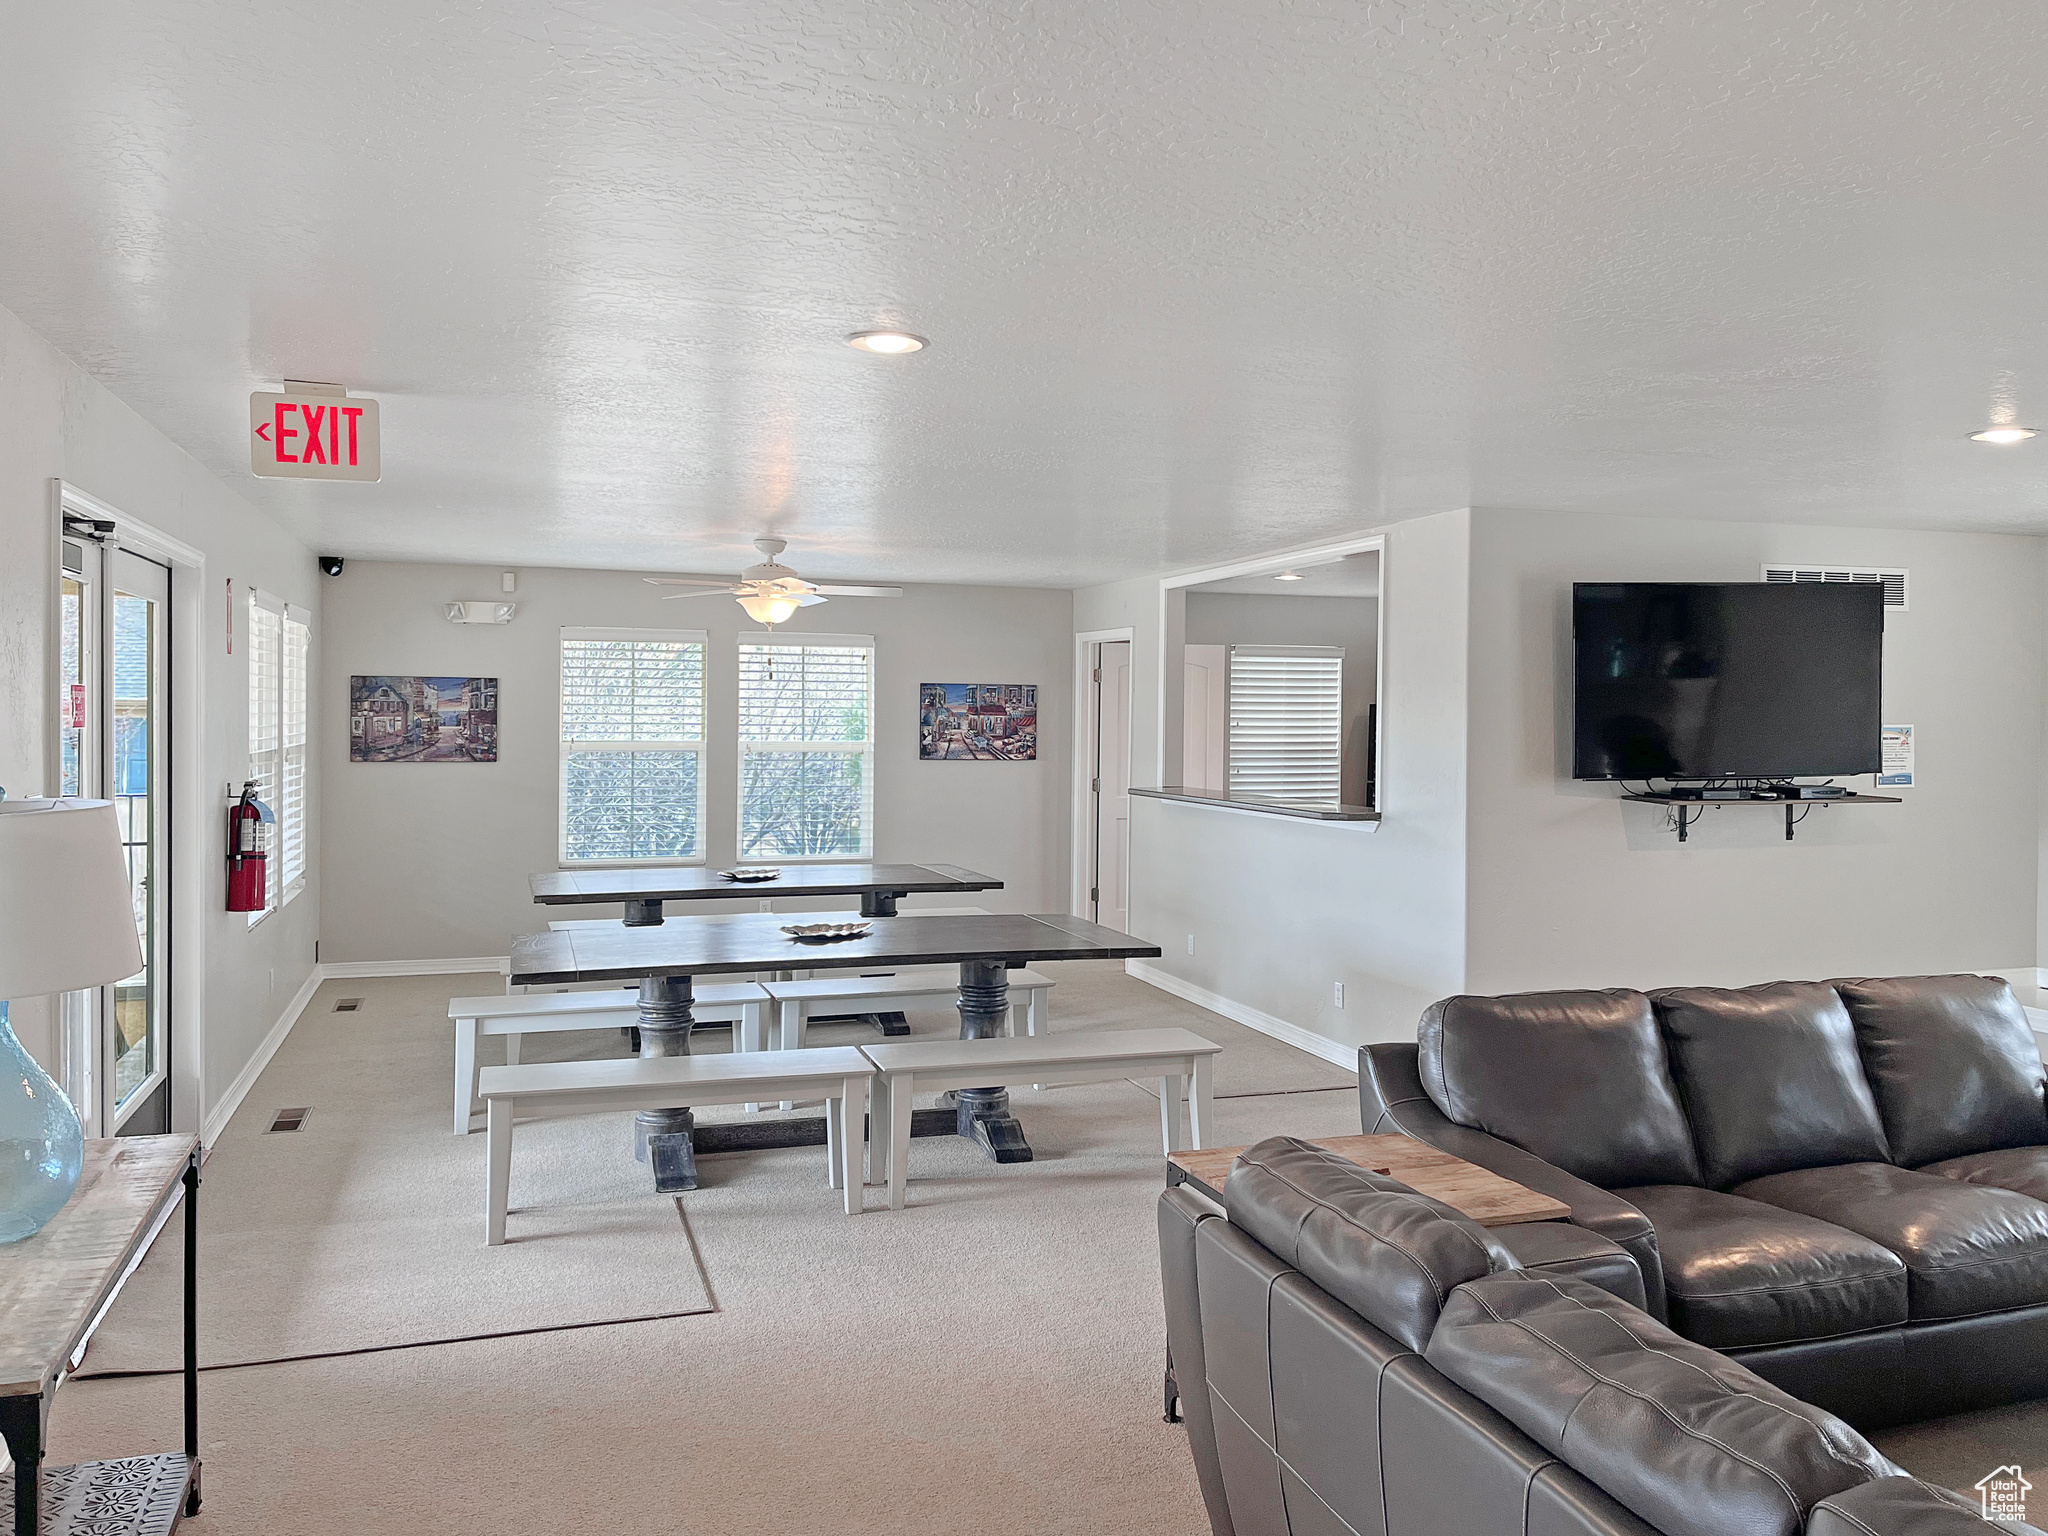 Gathering or eating area in the community  center boasting a large tv and fireplace, next to kitchen and game area